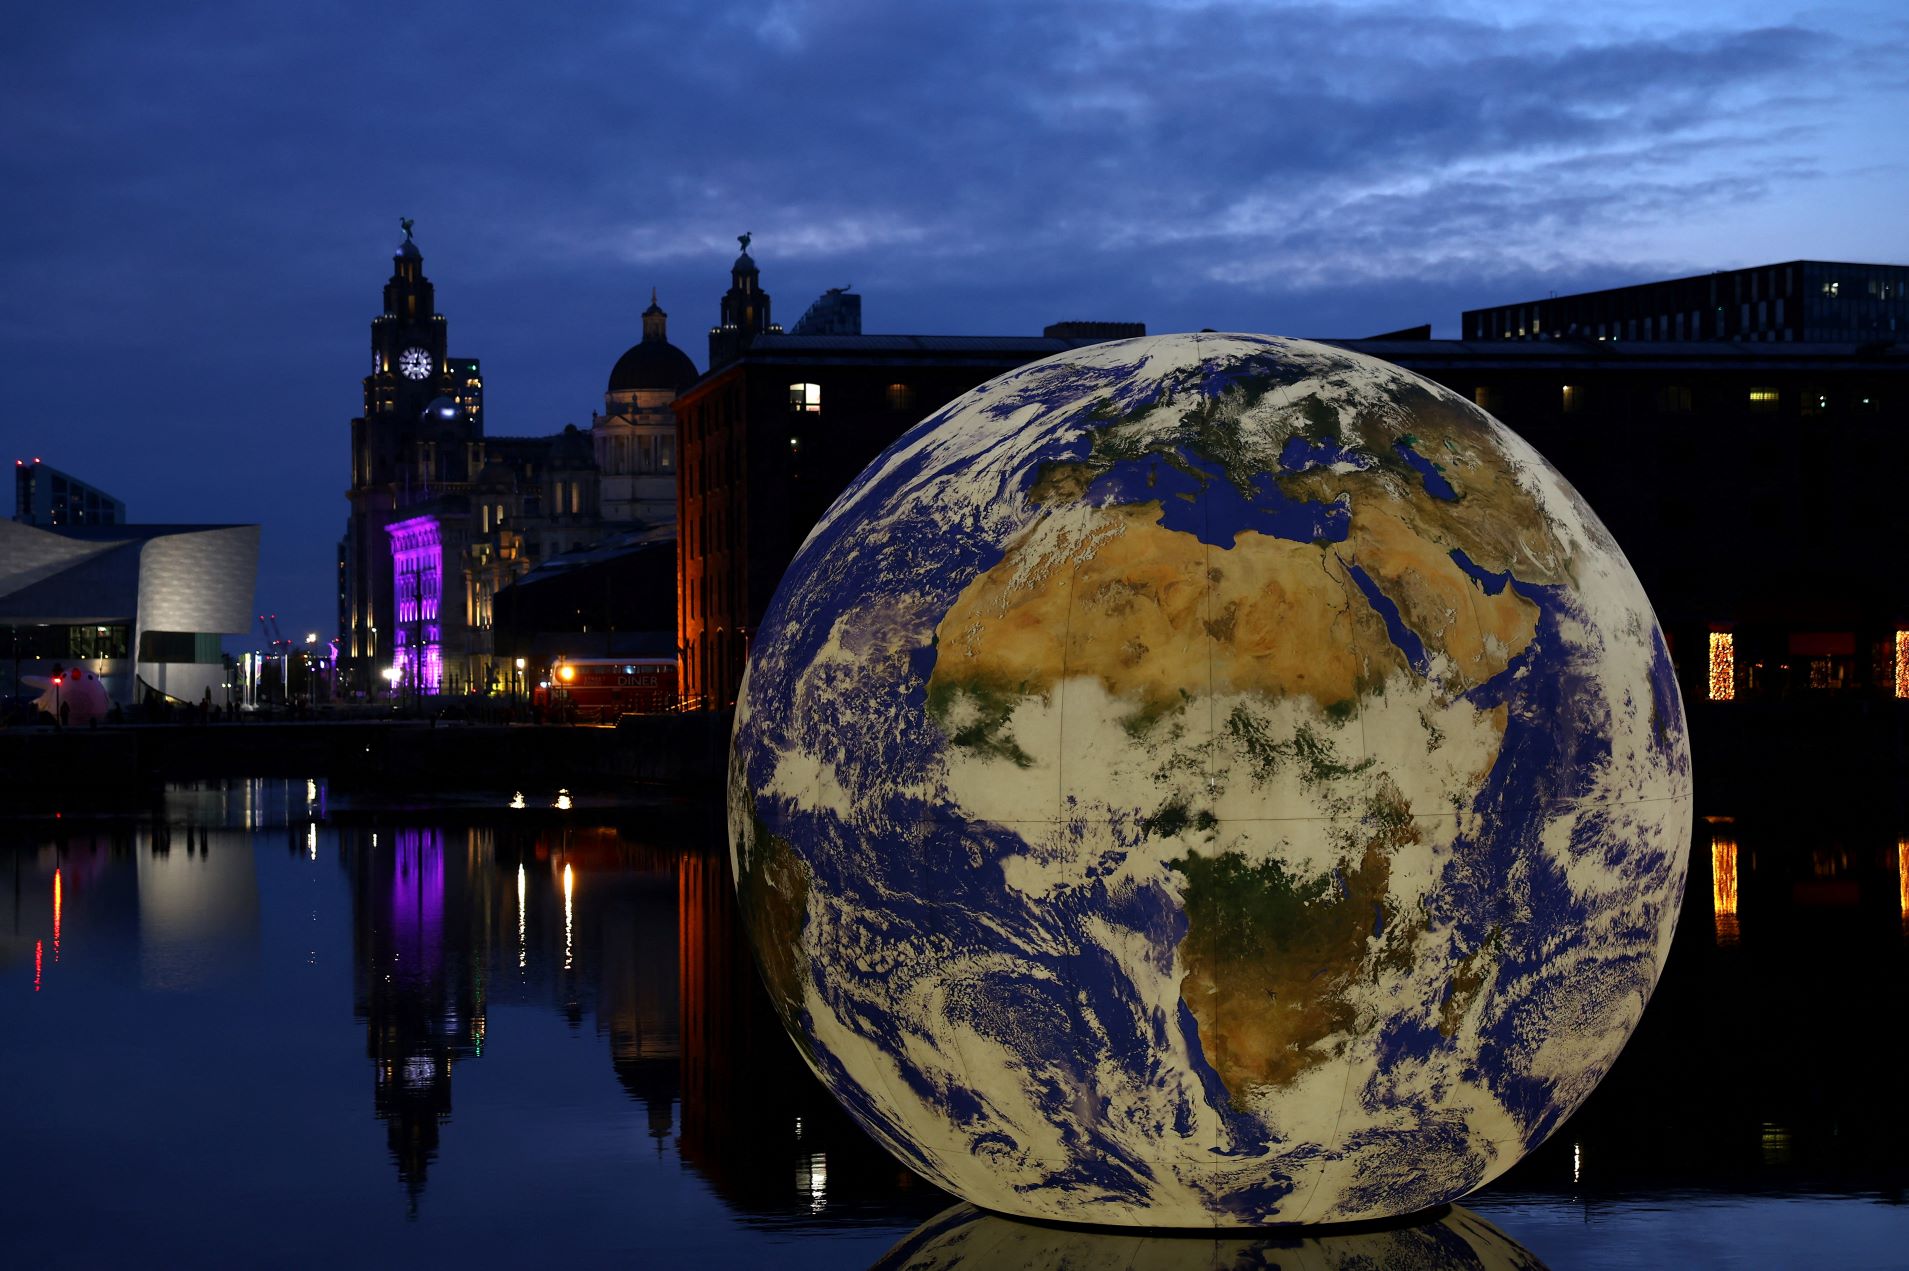 Luke Jerram's “Floating Earth,” an art installation of an illuminated globe sitting in water at night as part of the Eurovision celebrations in Liverpool, England on April 28, 2023. REUTERS/Molly Darlington